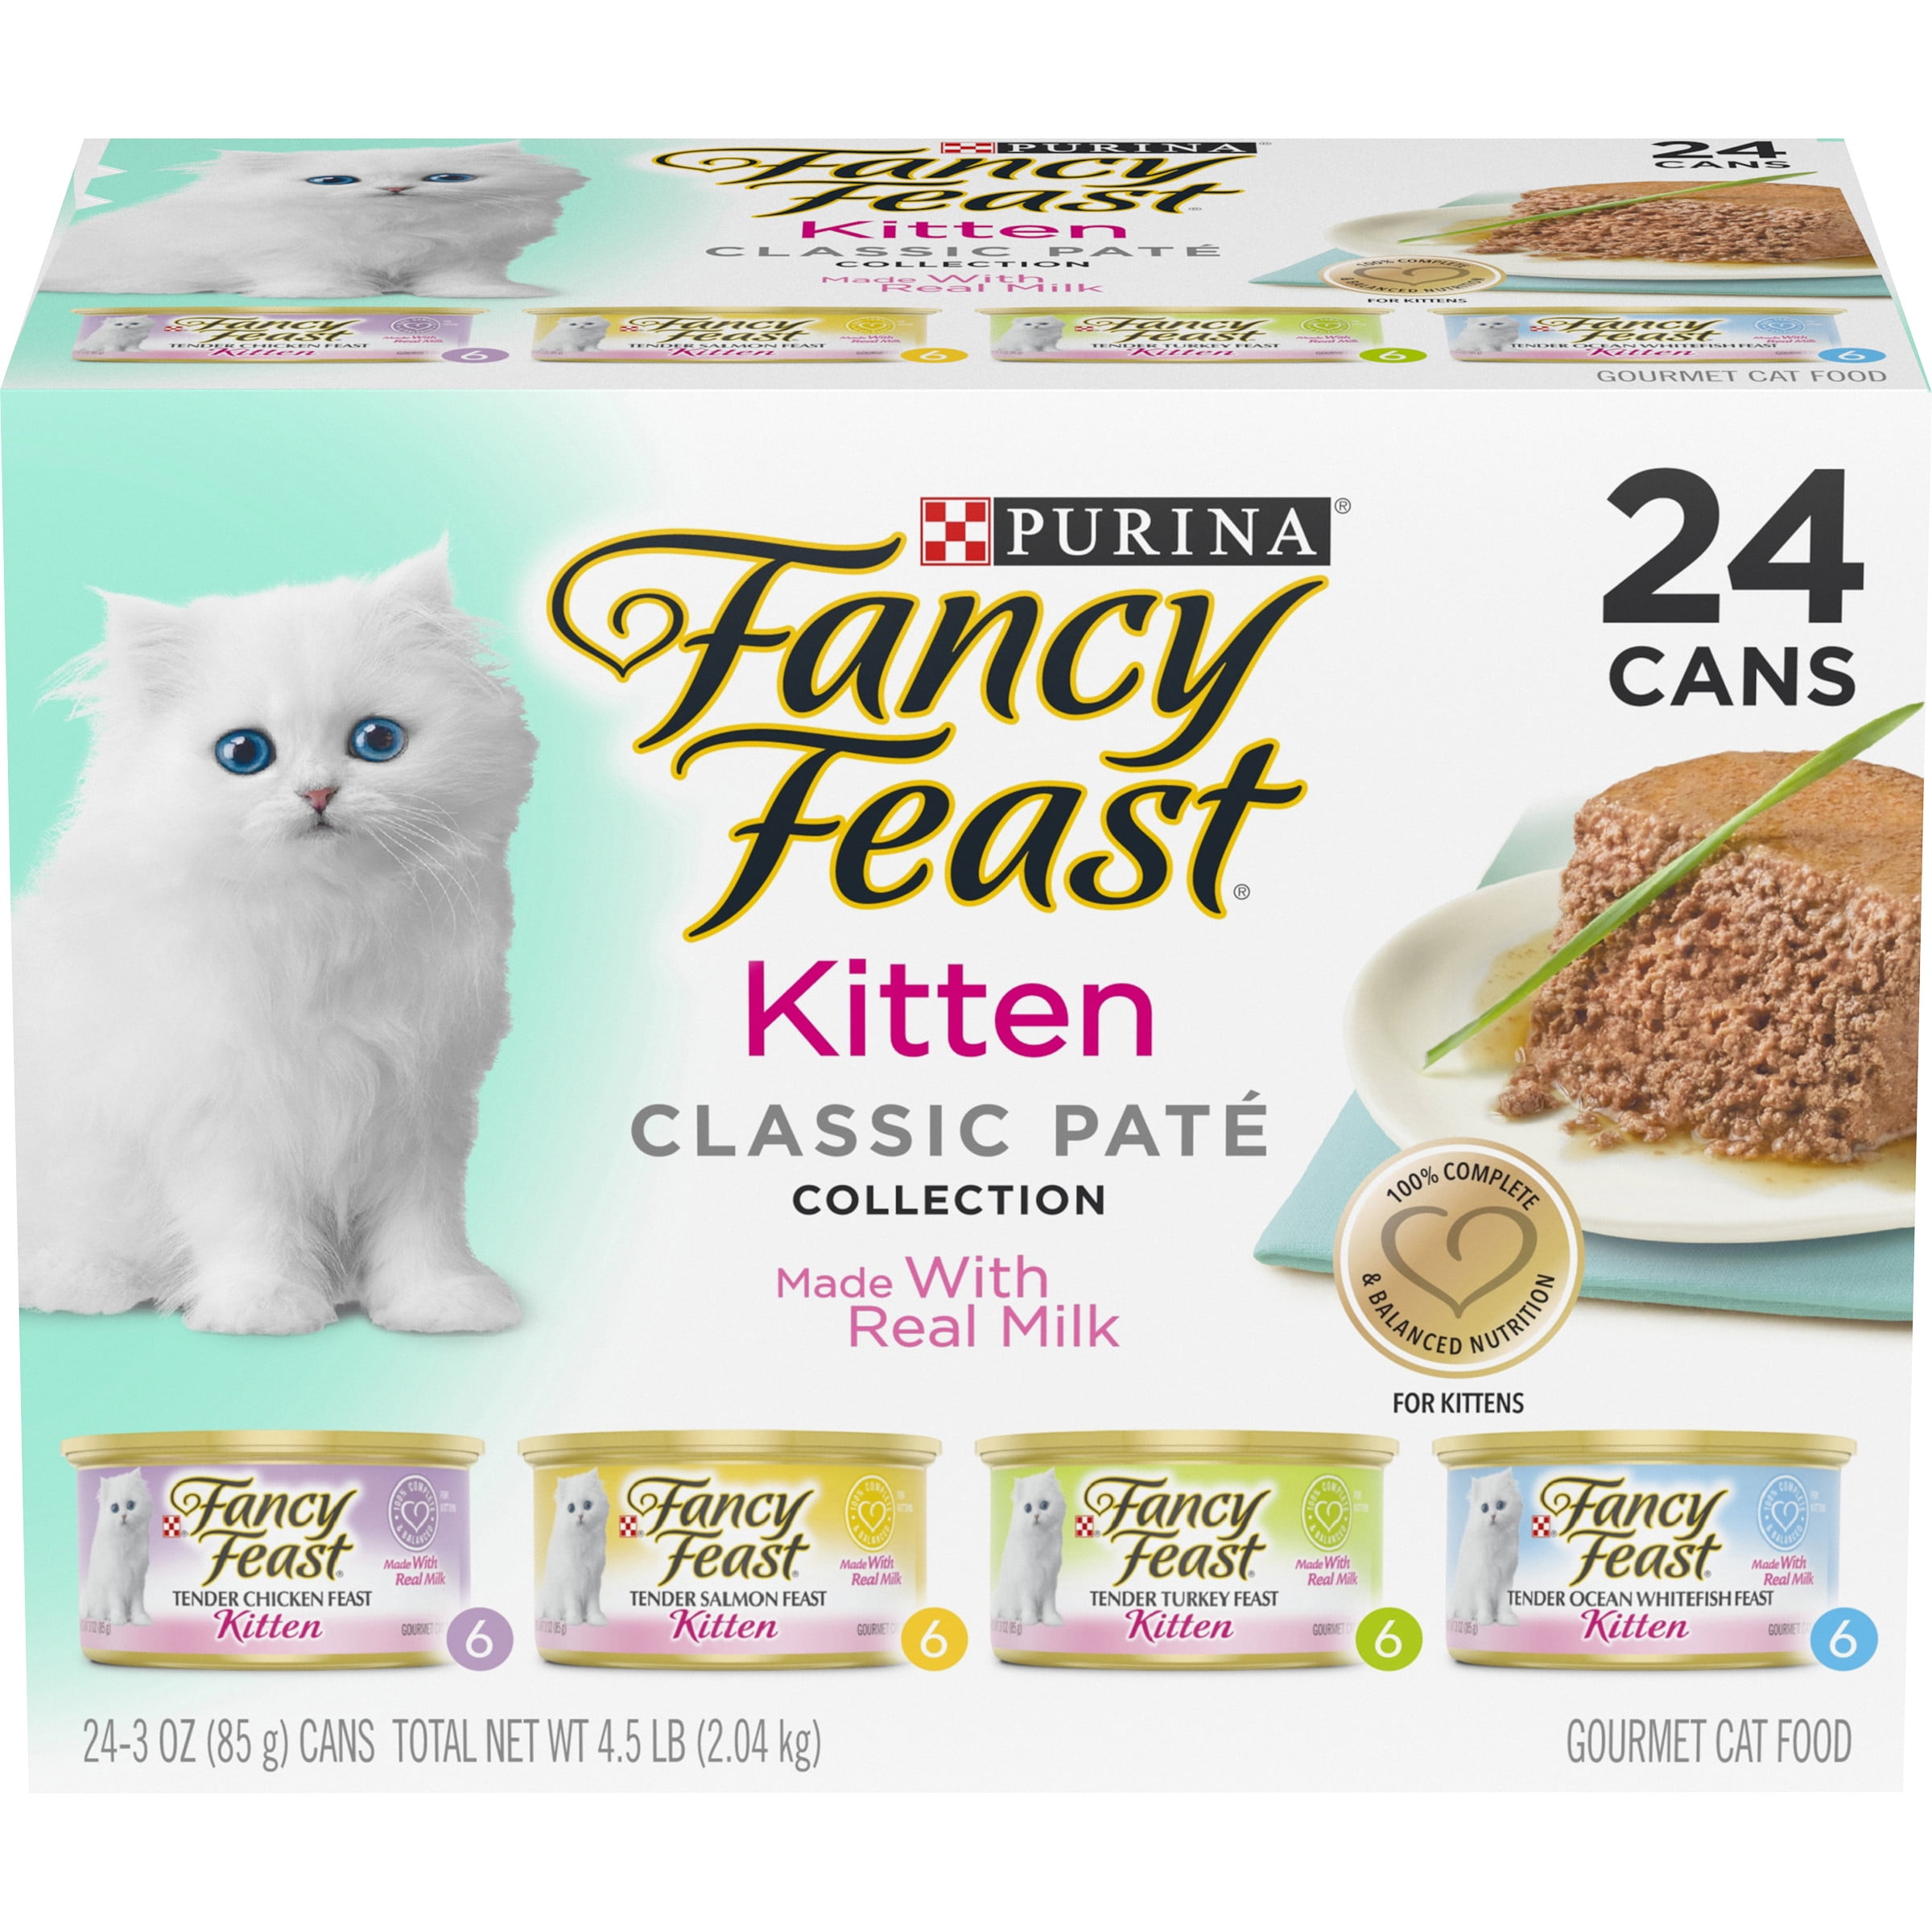 Purina Fancy Feast Classic Pate Wet Cat Food for Kittens, 3 oz Boxes (24 Pack)